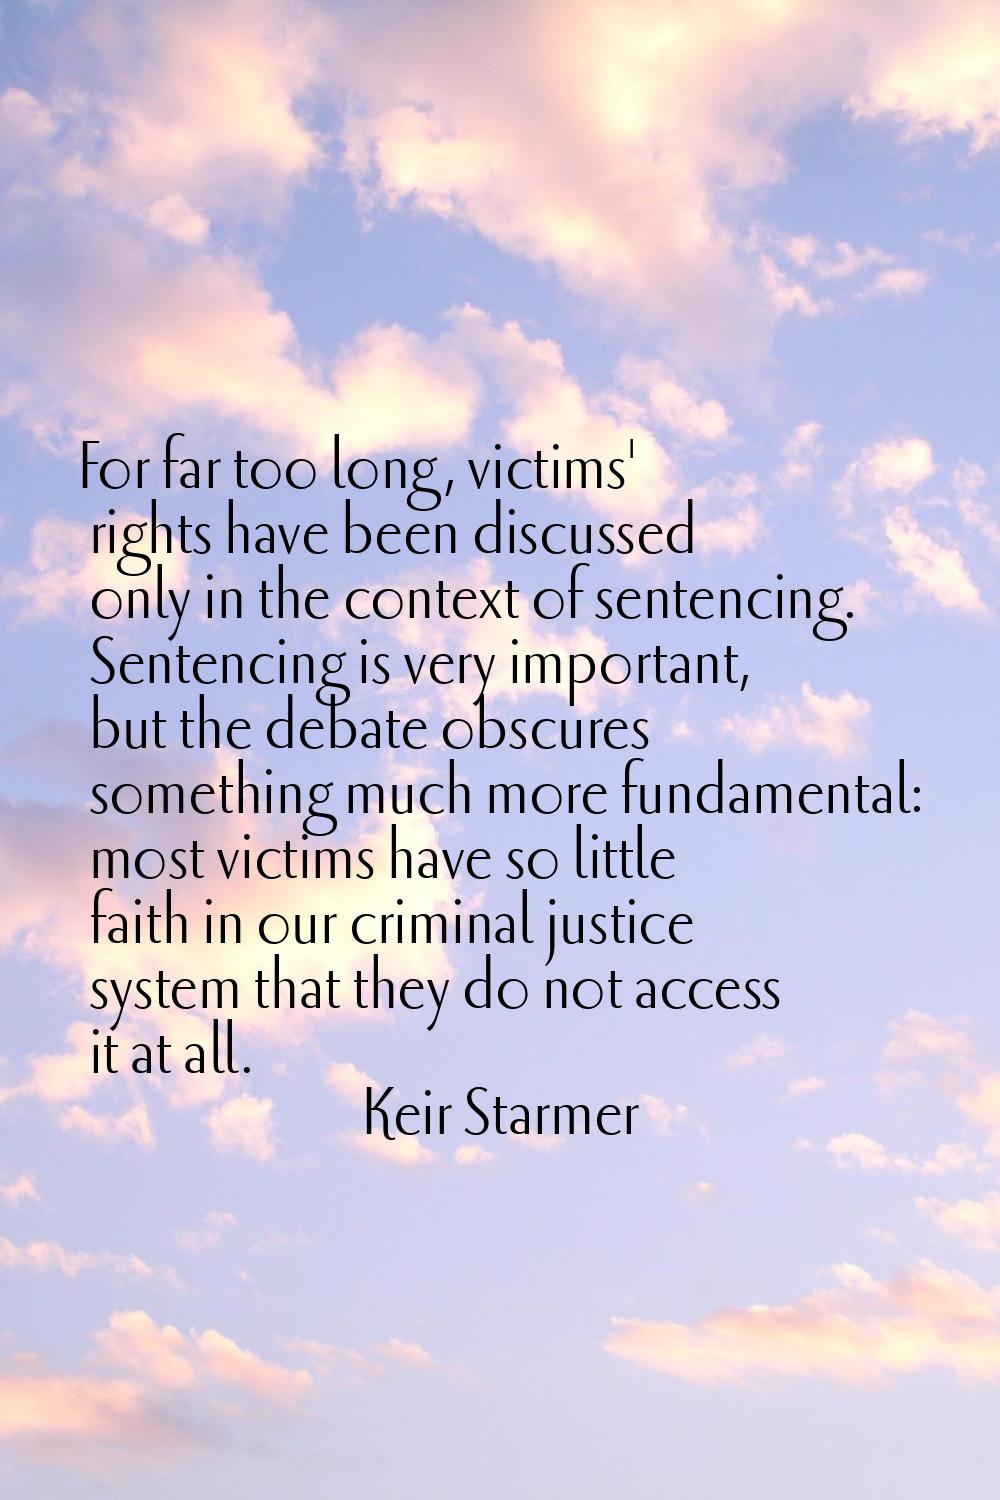 For far too long, victims' rights have been discussed only in the context of sentencing. Sentencing